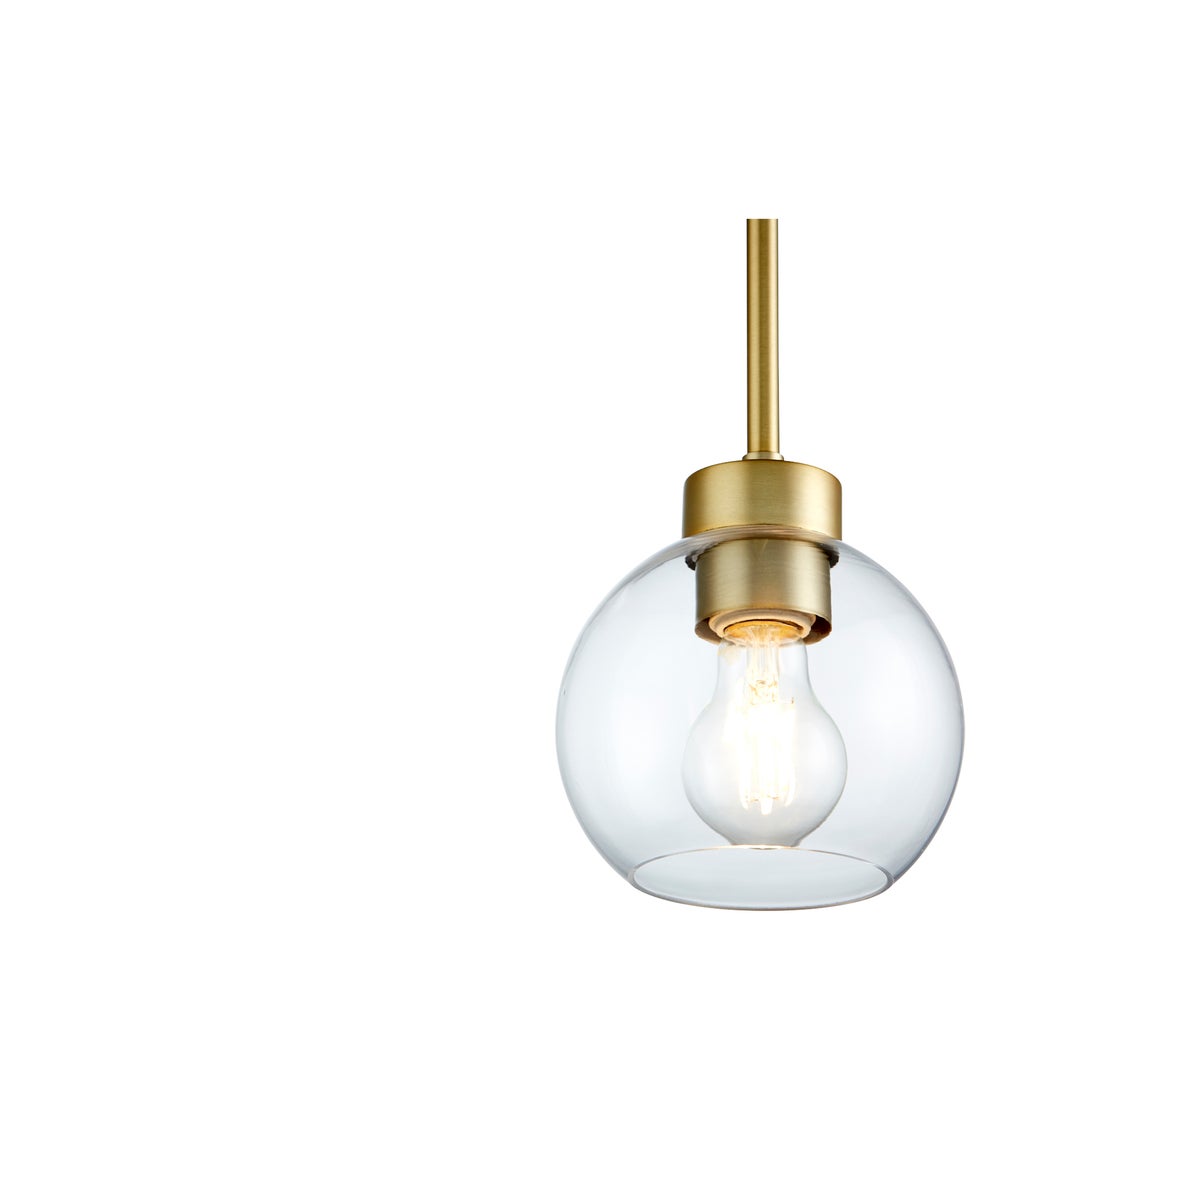 Transitional pendant light with clear glass globe and gold pole, adding a touch of mid-century elegance. Aged brass finish and thin acrylic accents elevate the look. Perfect addition to any space.